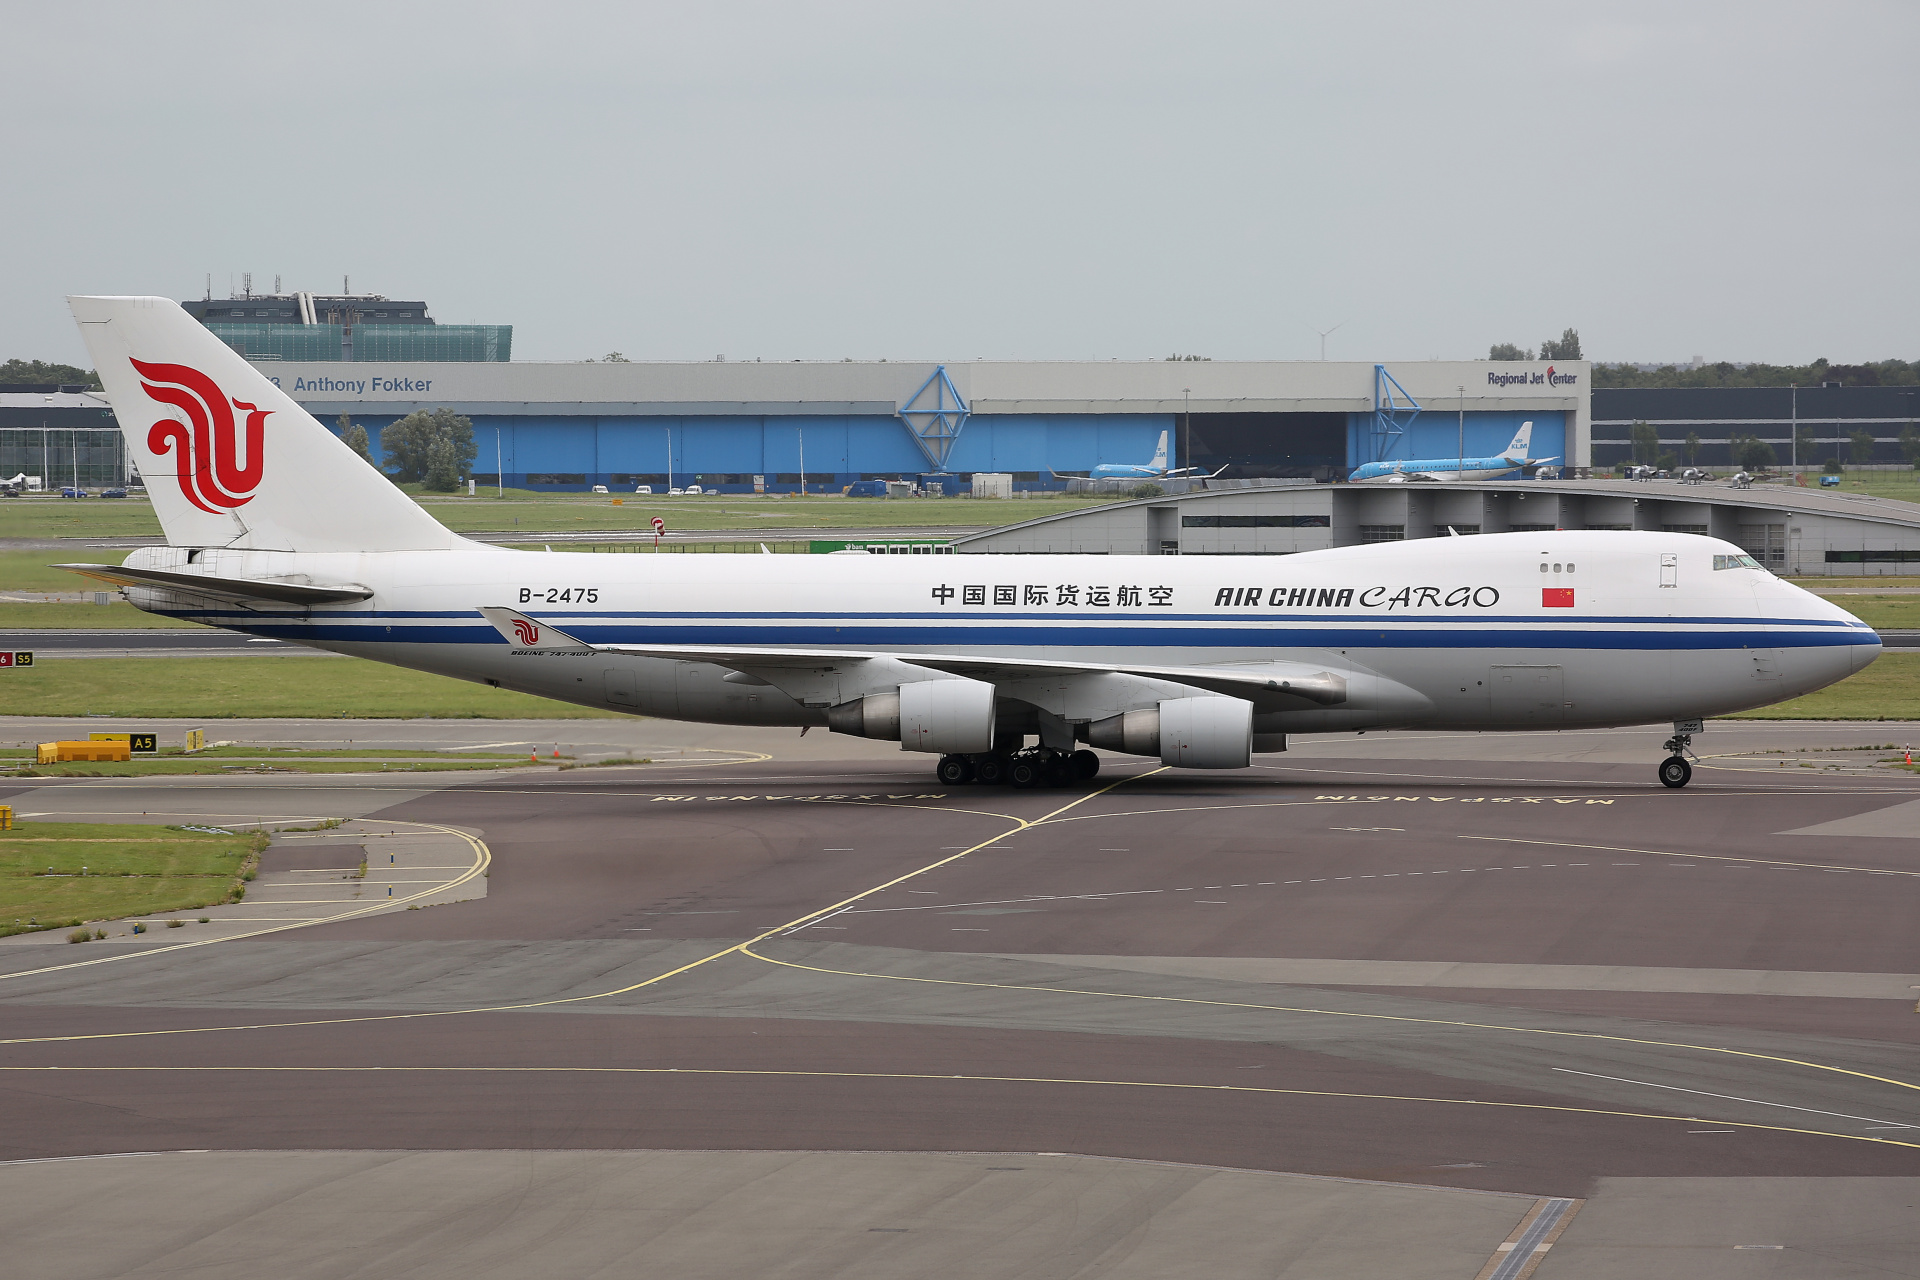 B-2475, Air China Cargo (Aircraft » Schiphol Spotting » Boeing 747-400F)